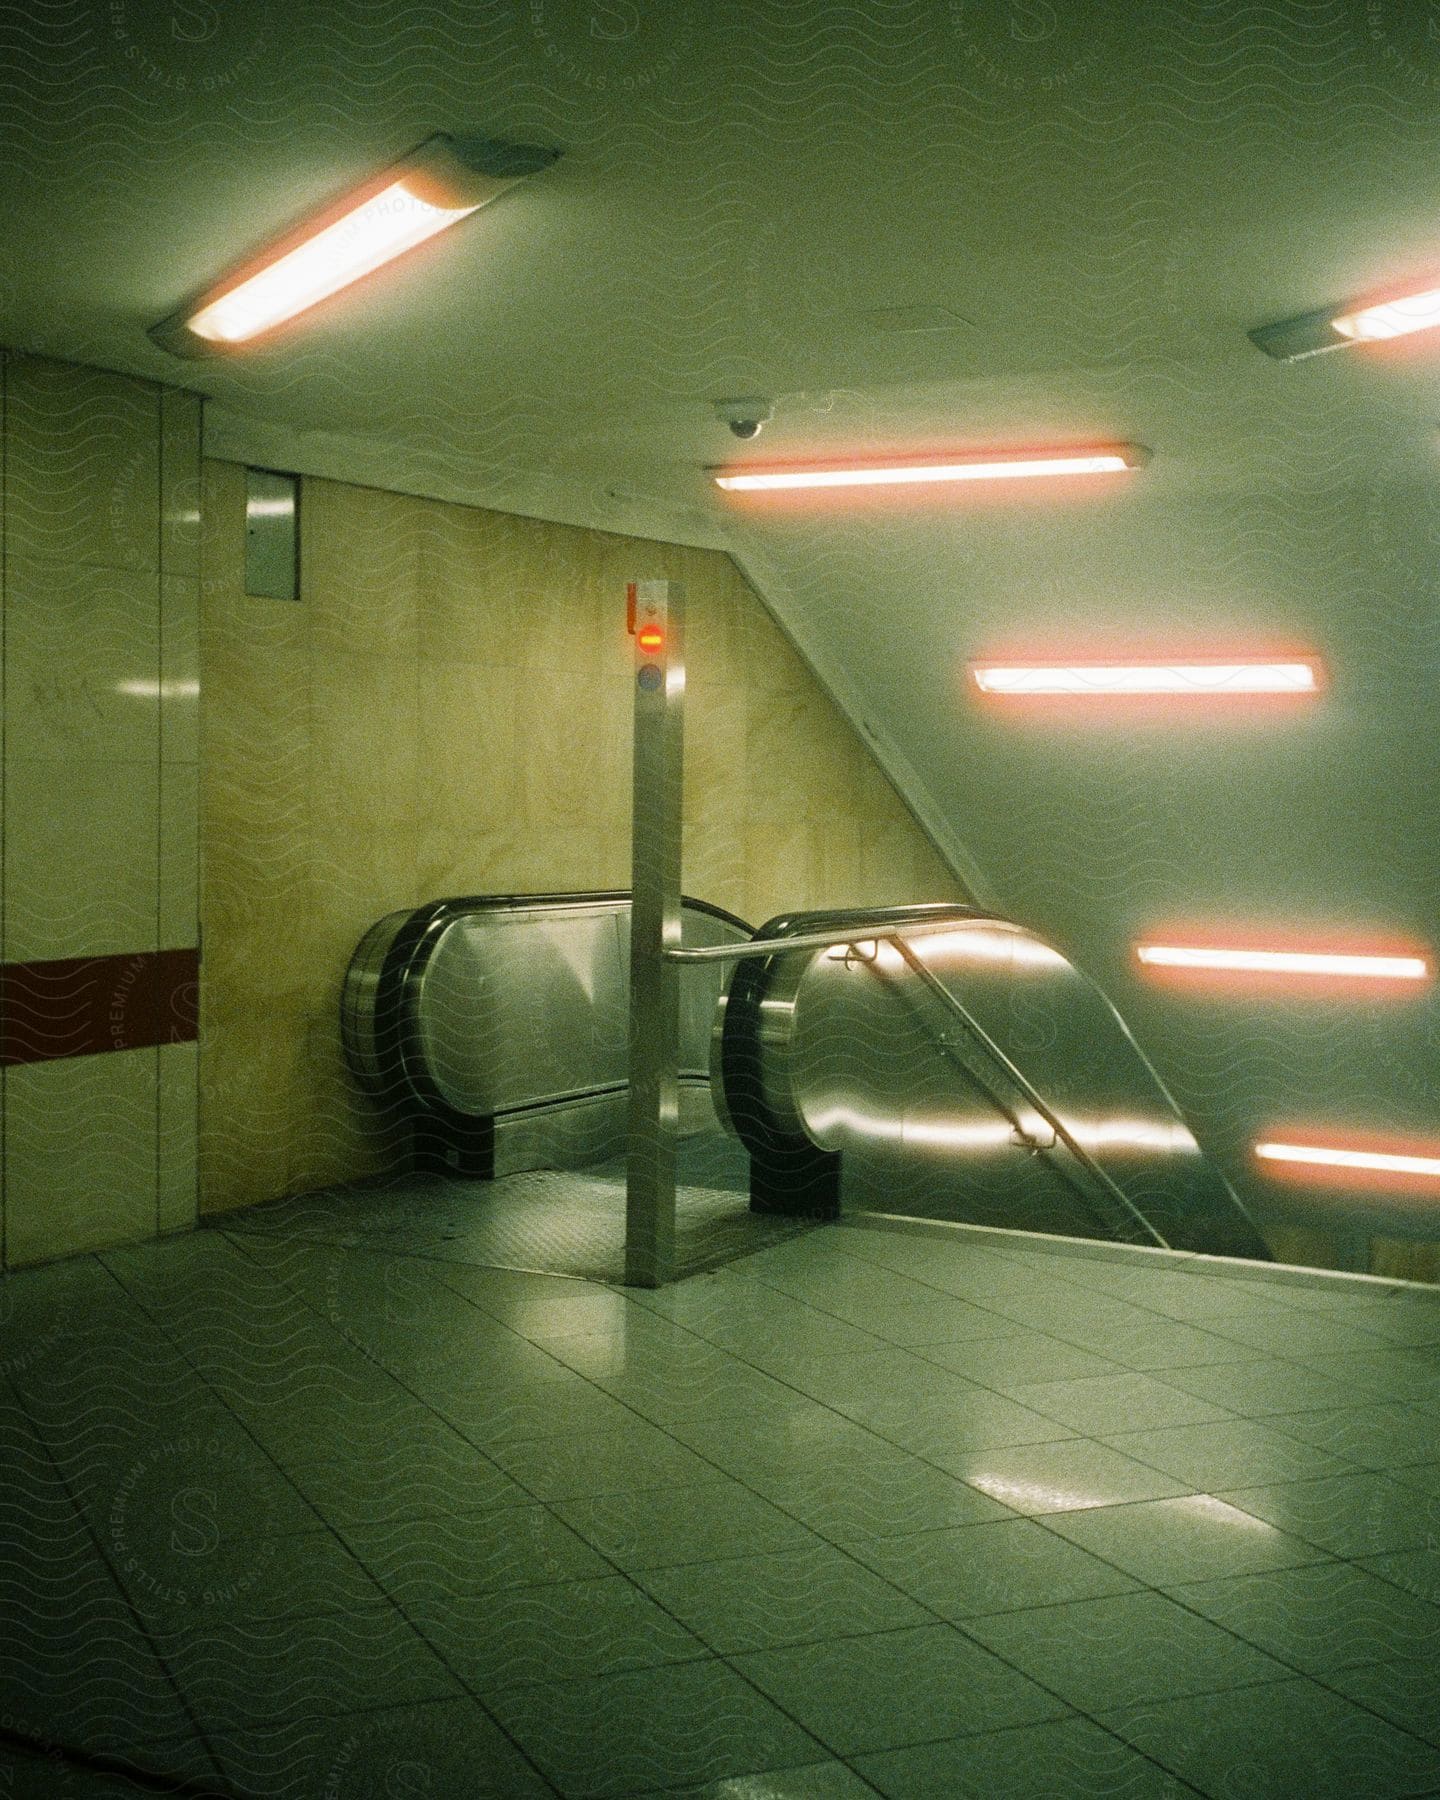 Fluorescent lights glow on the ceiling above the floor and over an escalator in the tunnel inside the subway station of fehrbelliner platz in berlin